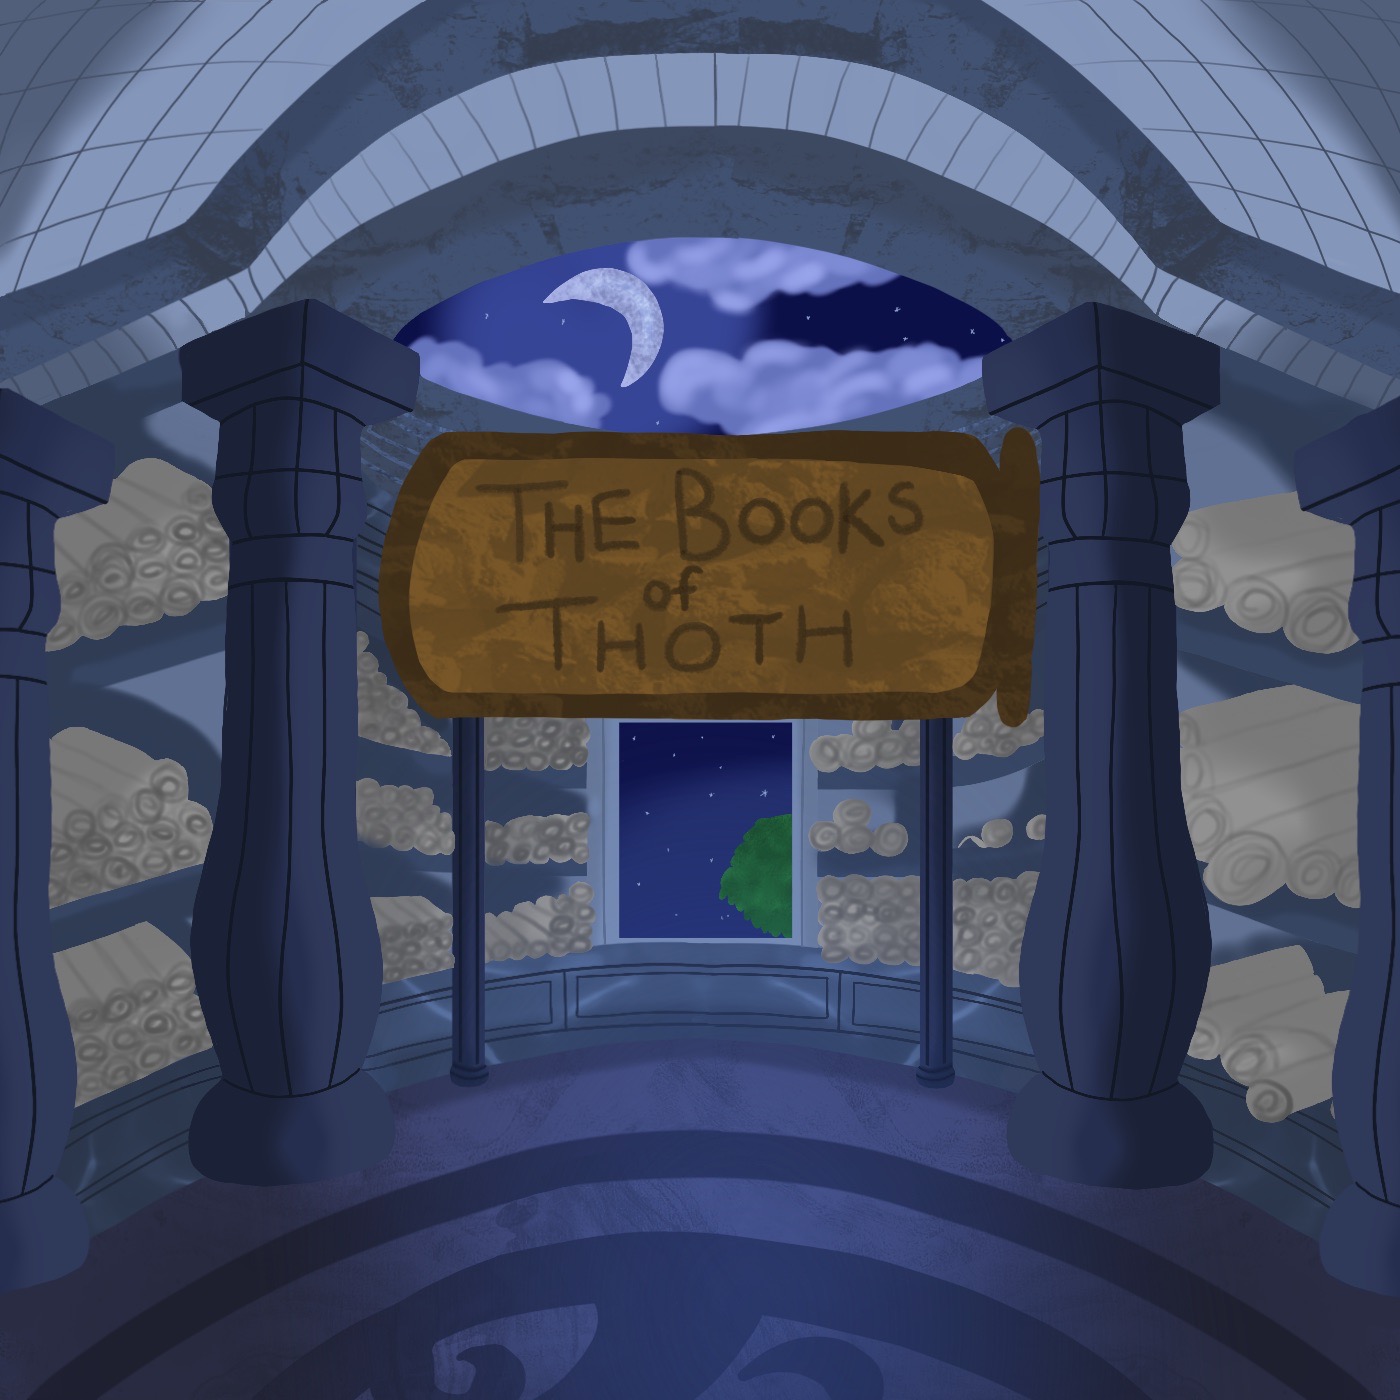 The Books of Thoth podcast show image